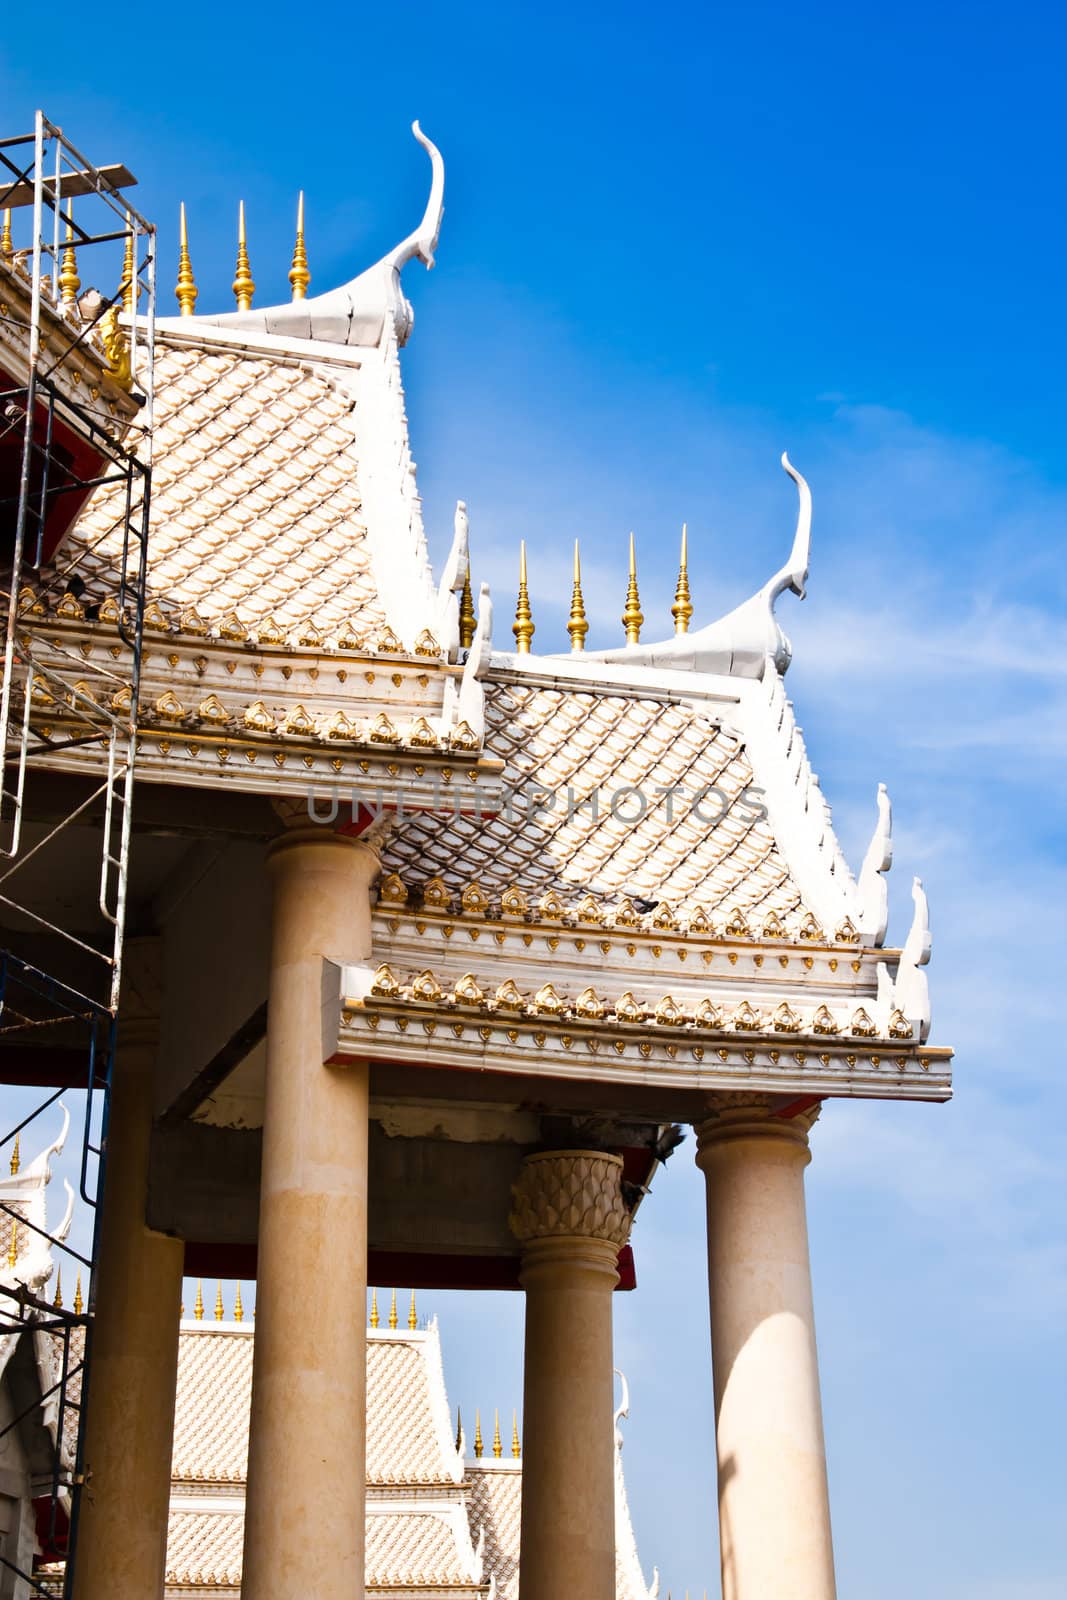 Roof Temples in Thailand are very beautiful sculptures.